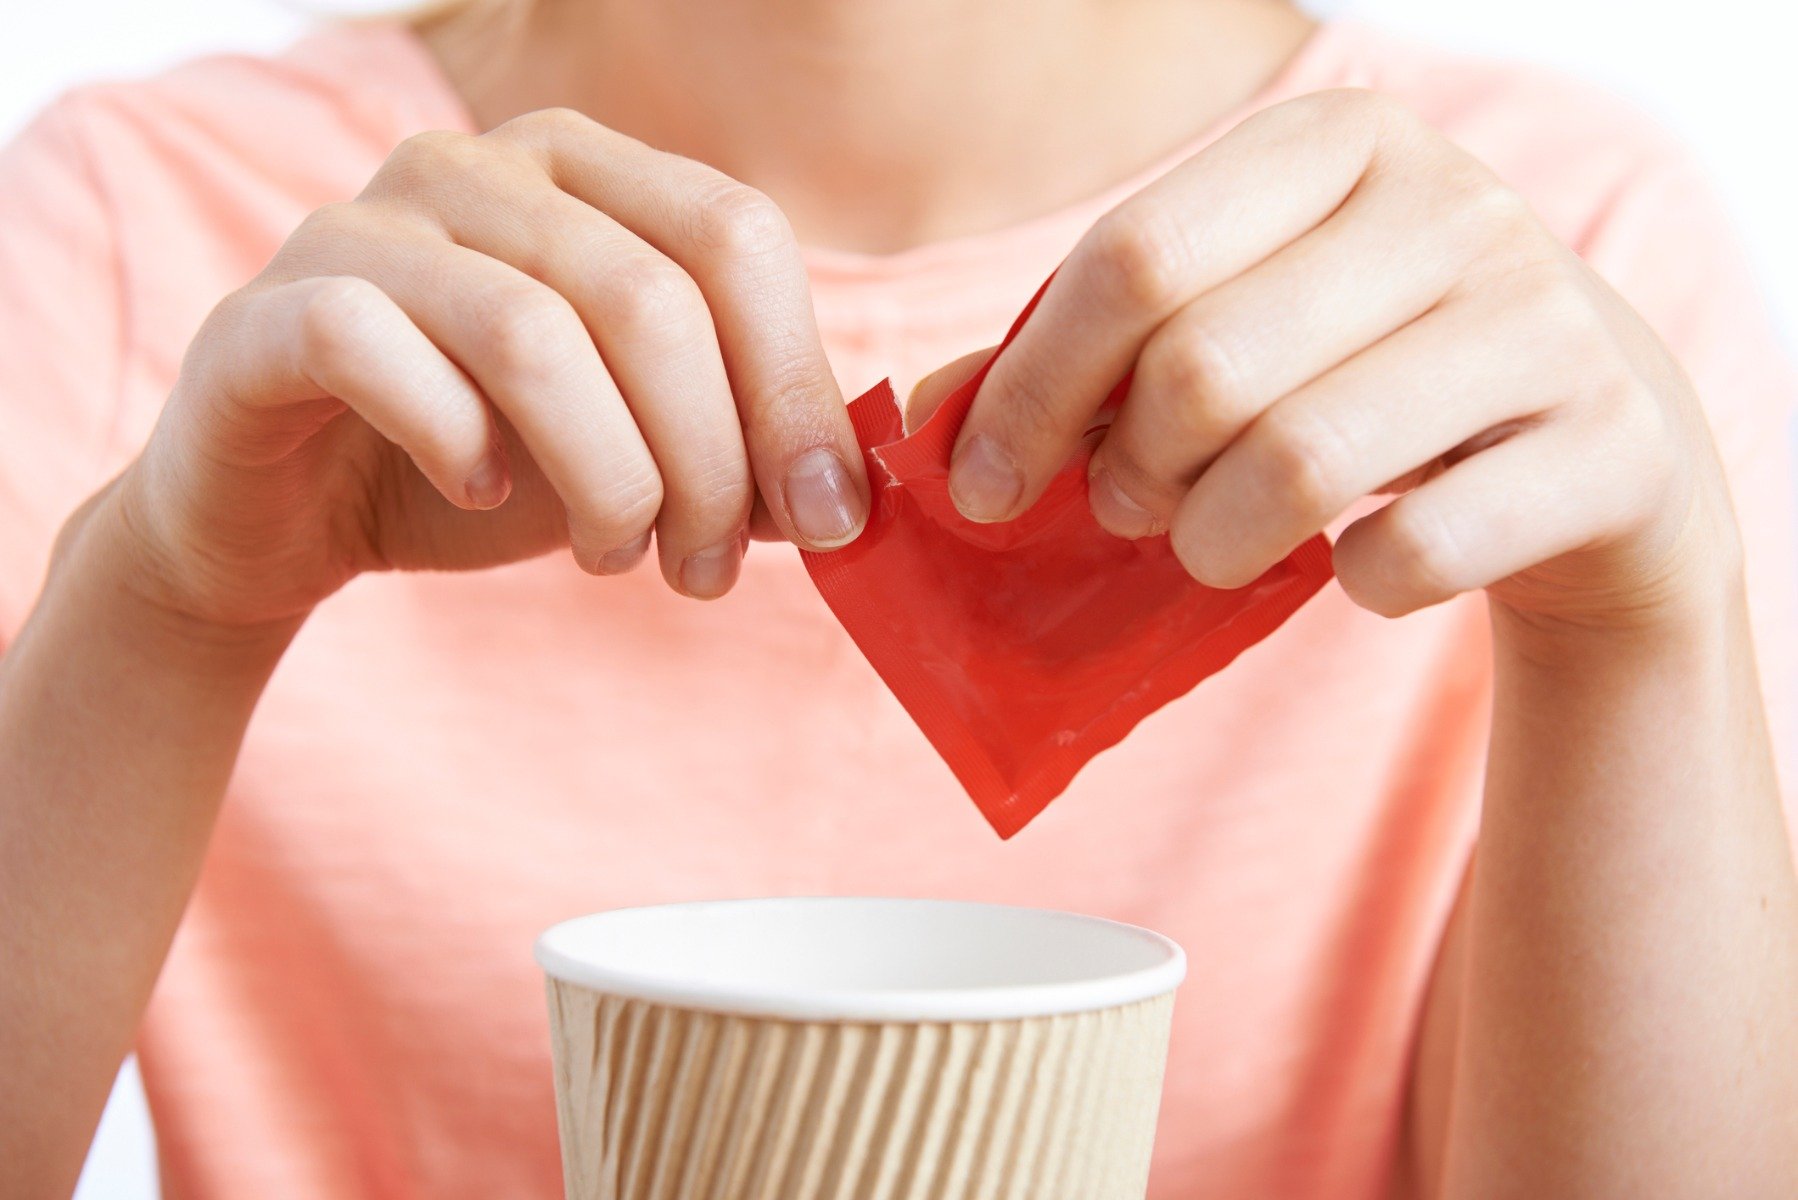 Artificial sweeteners - myths and facts about their safety and effects on health